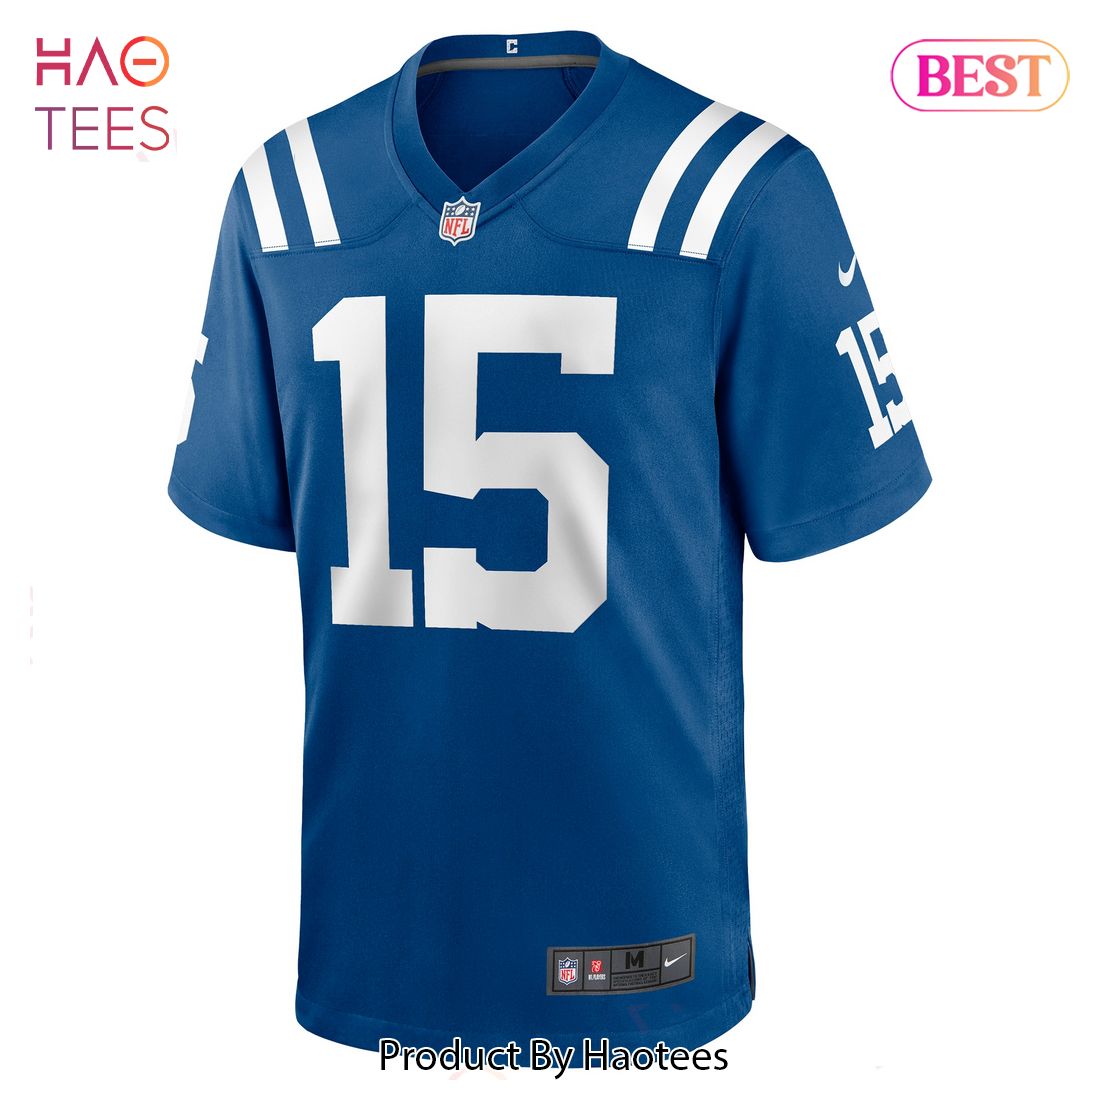 Keke Coutee Indianapolis Colts Nike Game Jersey Royal